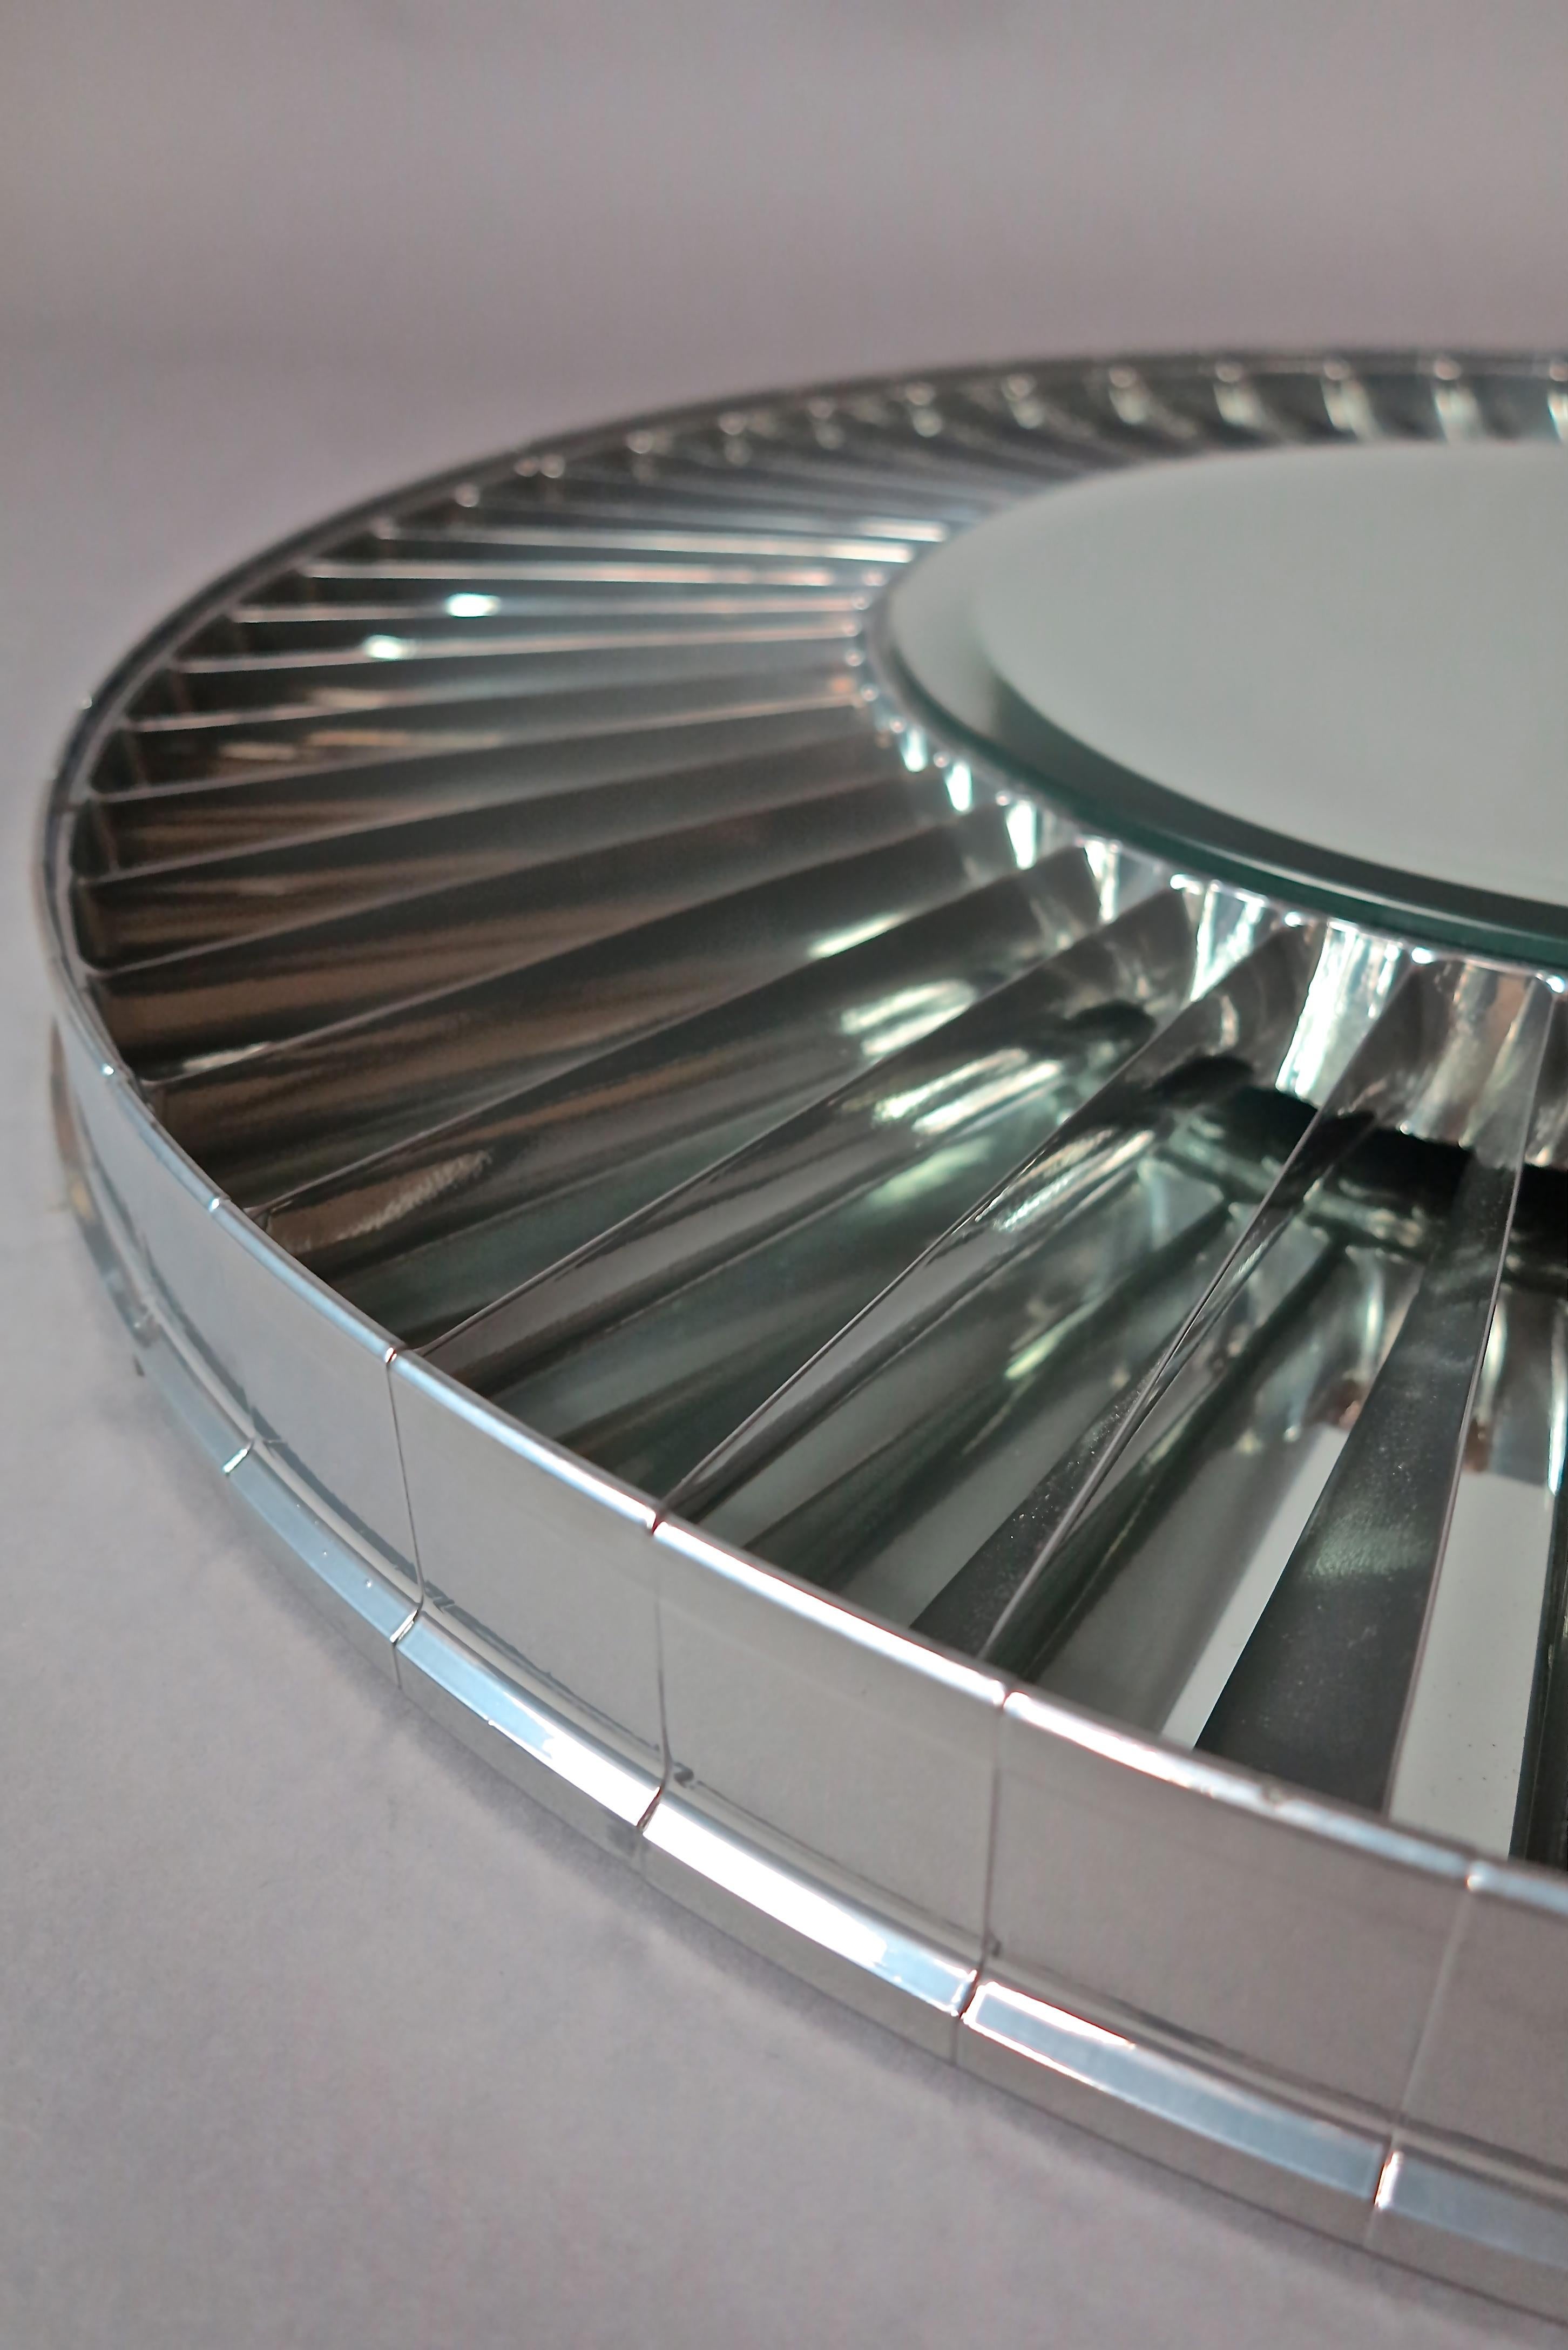 Crafted from a Rolls Royce Gas Turbine jet engine our skilled craftsmen have created a very detailed, mirror from the stator blades within a Spey Aircraft Engine

The stator blades have been powder coated and mounted with a bevel edge mirror